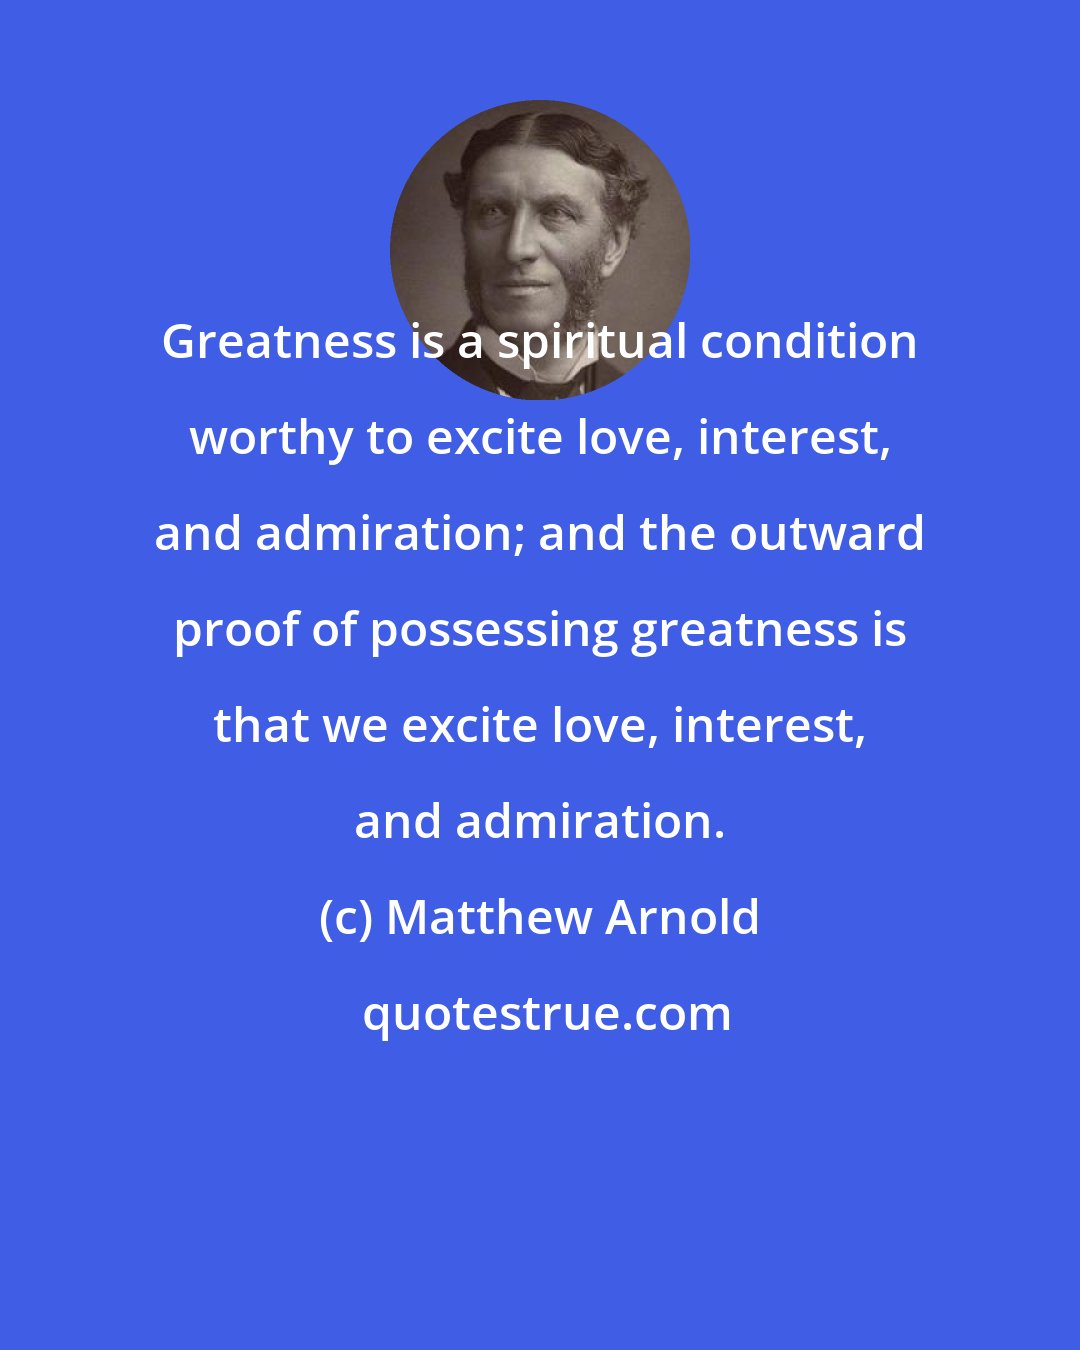 Matthew Arnold: Greatness is a spiritual condition worthy to excite love, interest, and admiration; and the outward proof of possessing greatness is that we excite love, interest, and admiration.